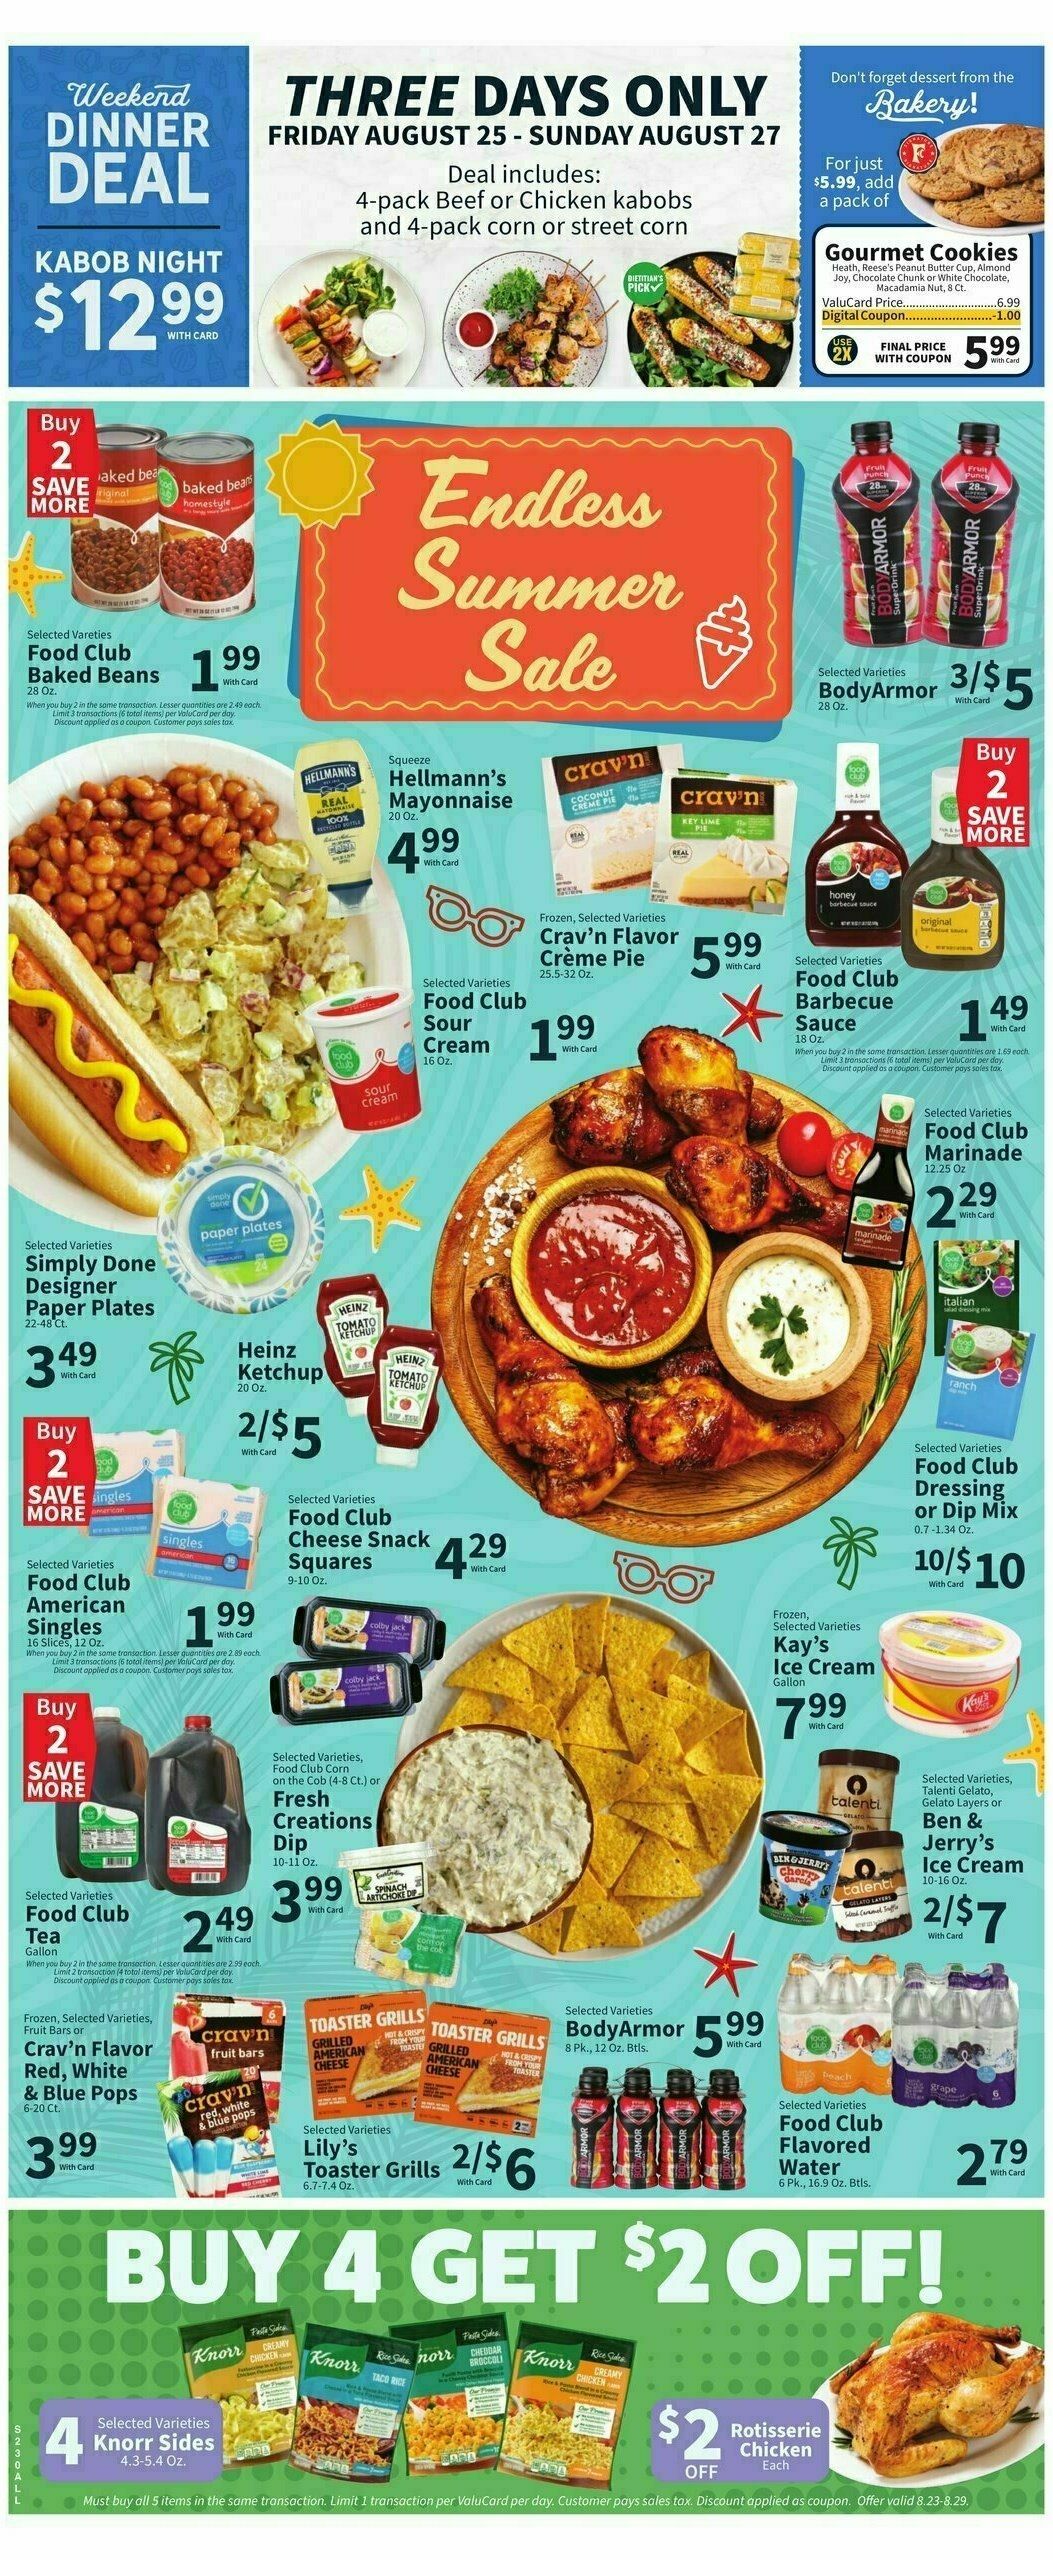 Food City Weekly Ad from August 23